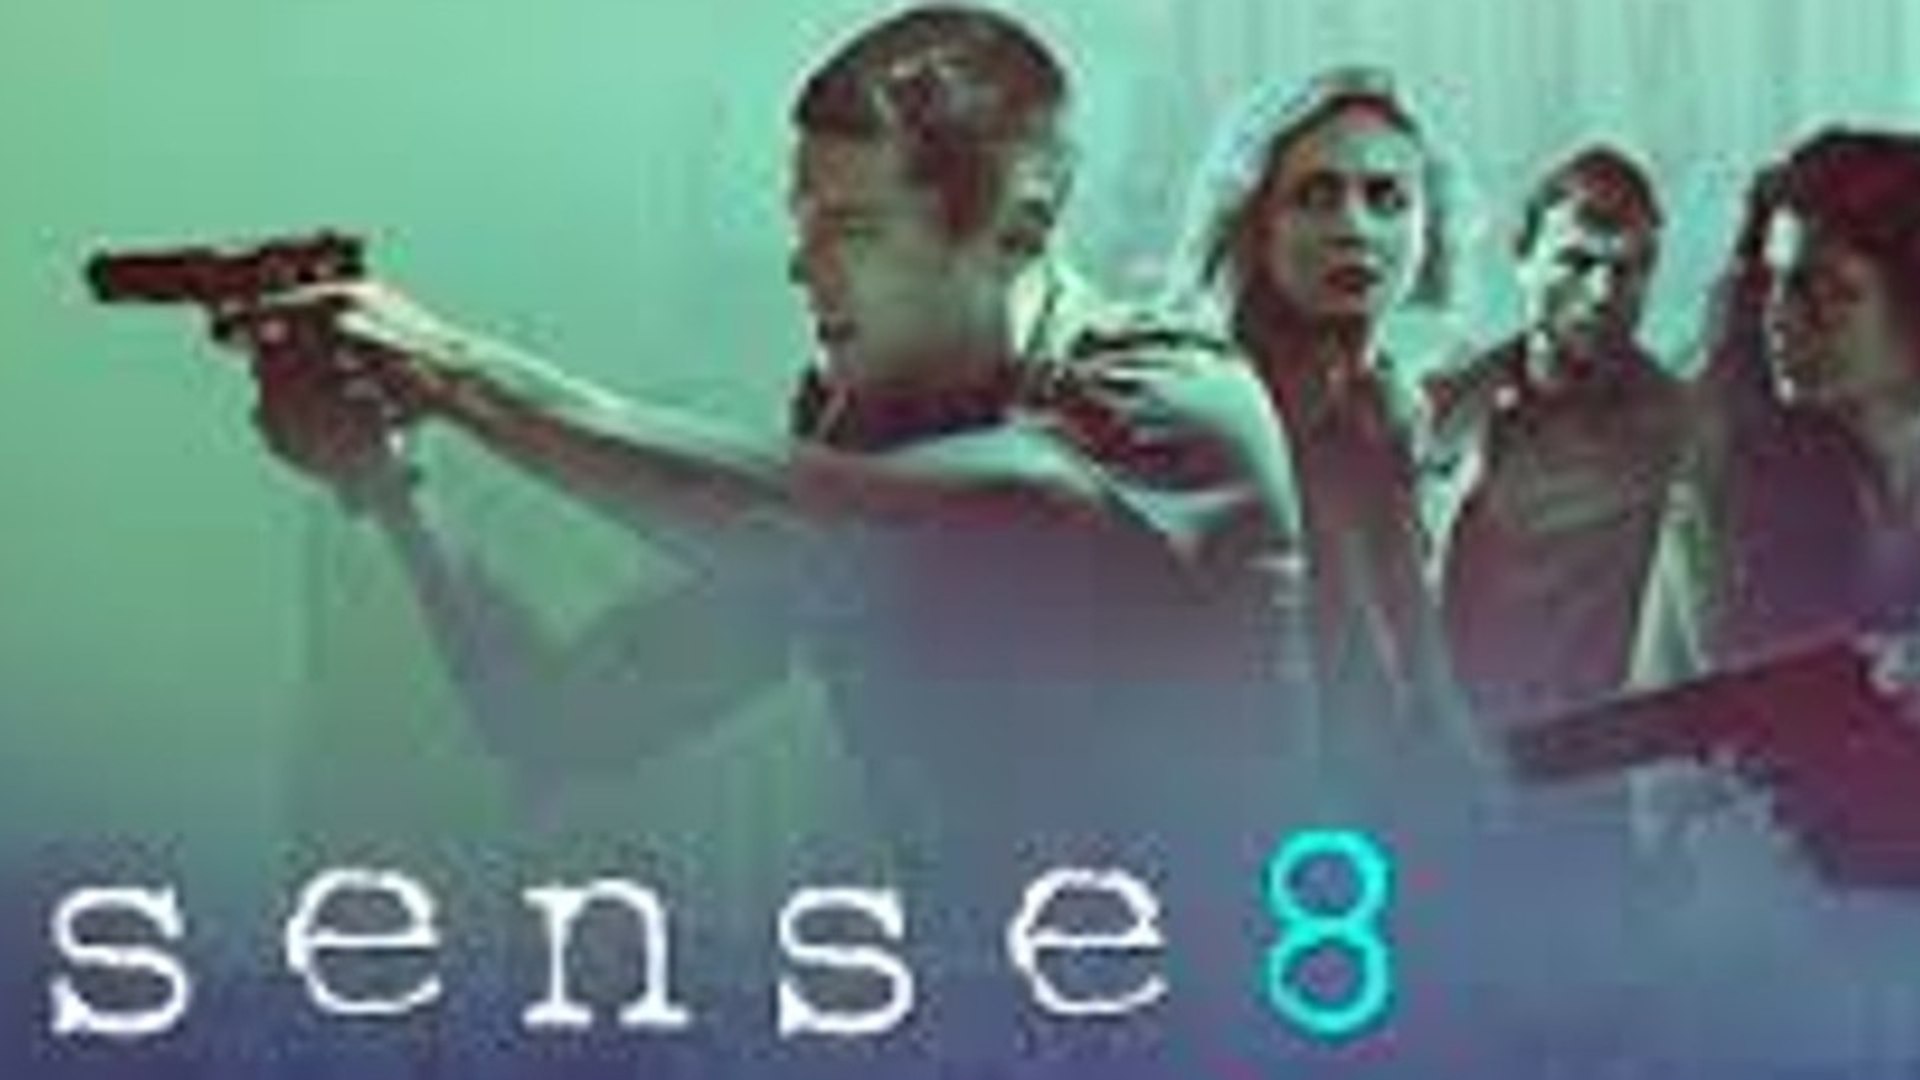 Sense8 Season 2 Release Date And Trailer Unveiled - Sense 8 Christmas Special , HD Wallpaper & Backgrounds